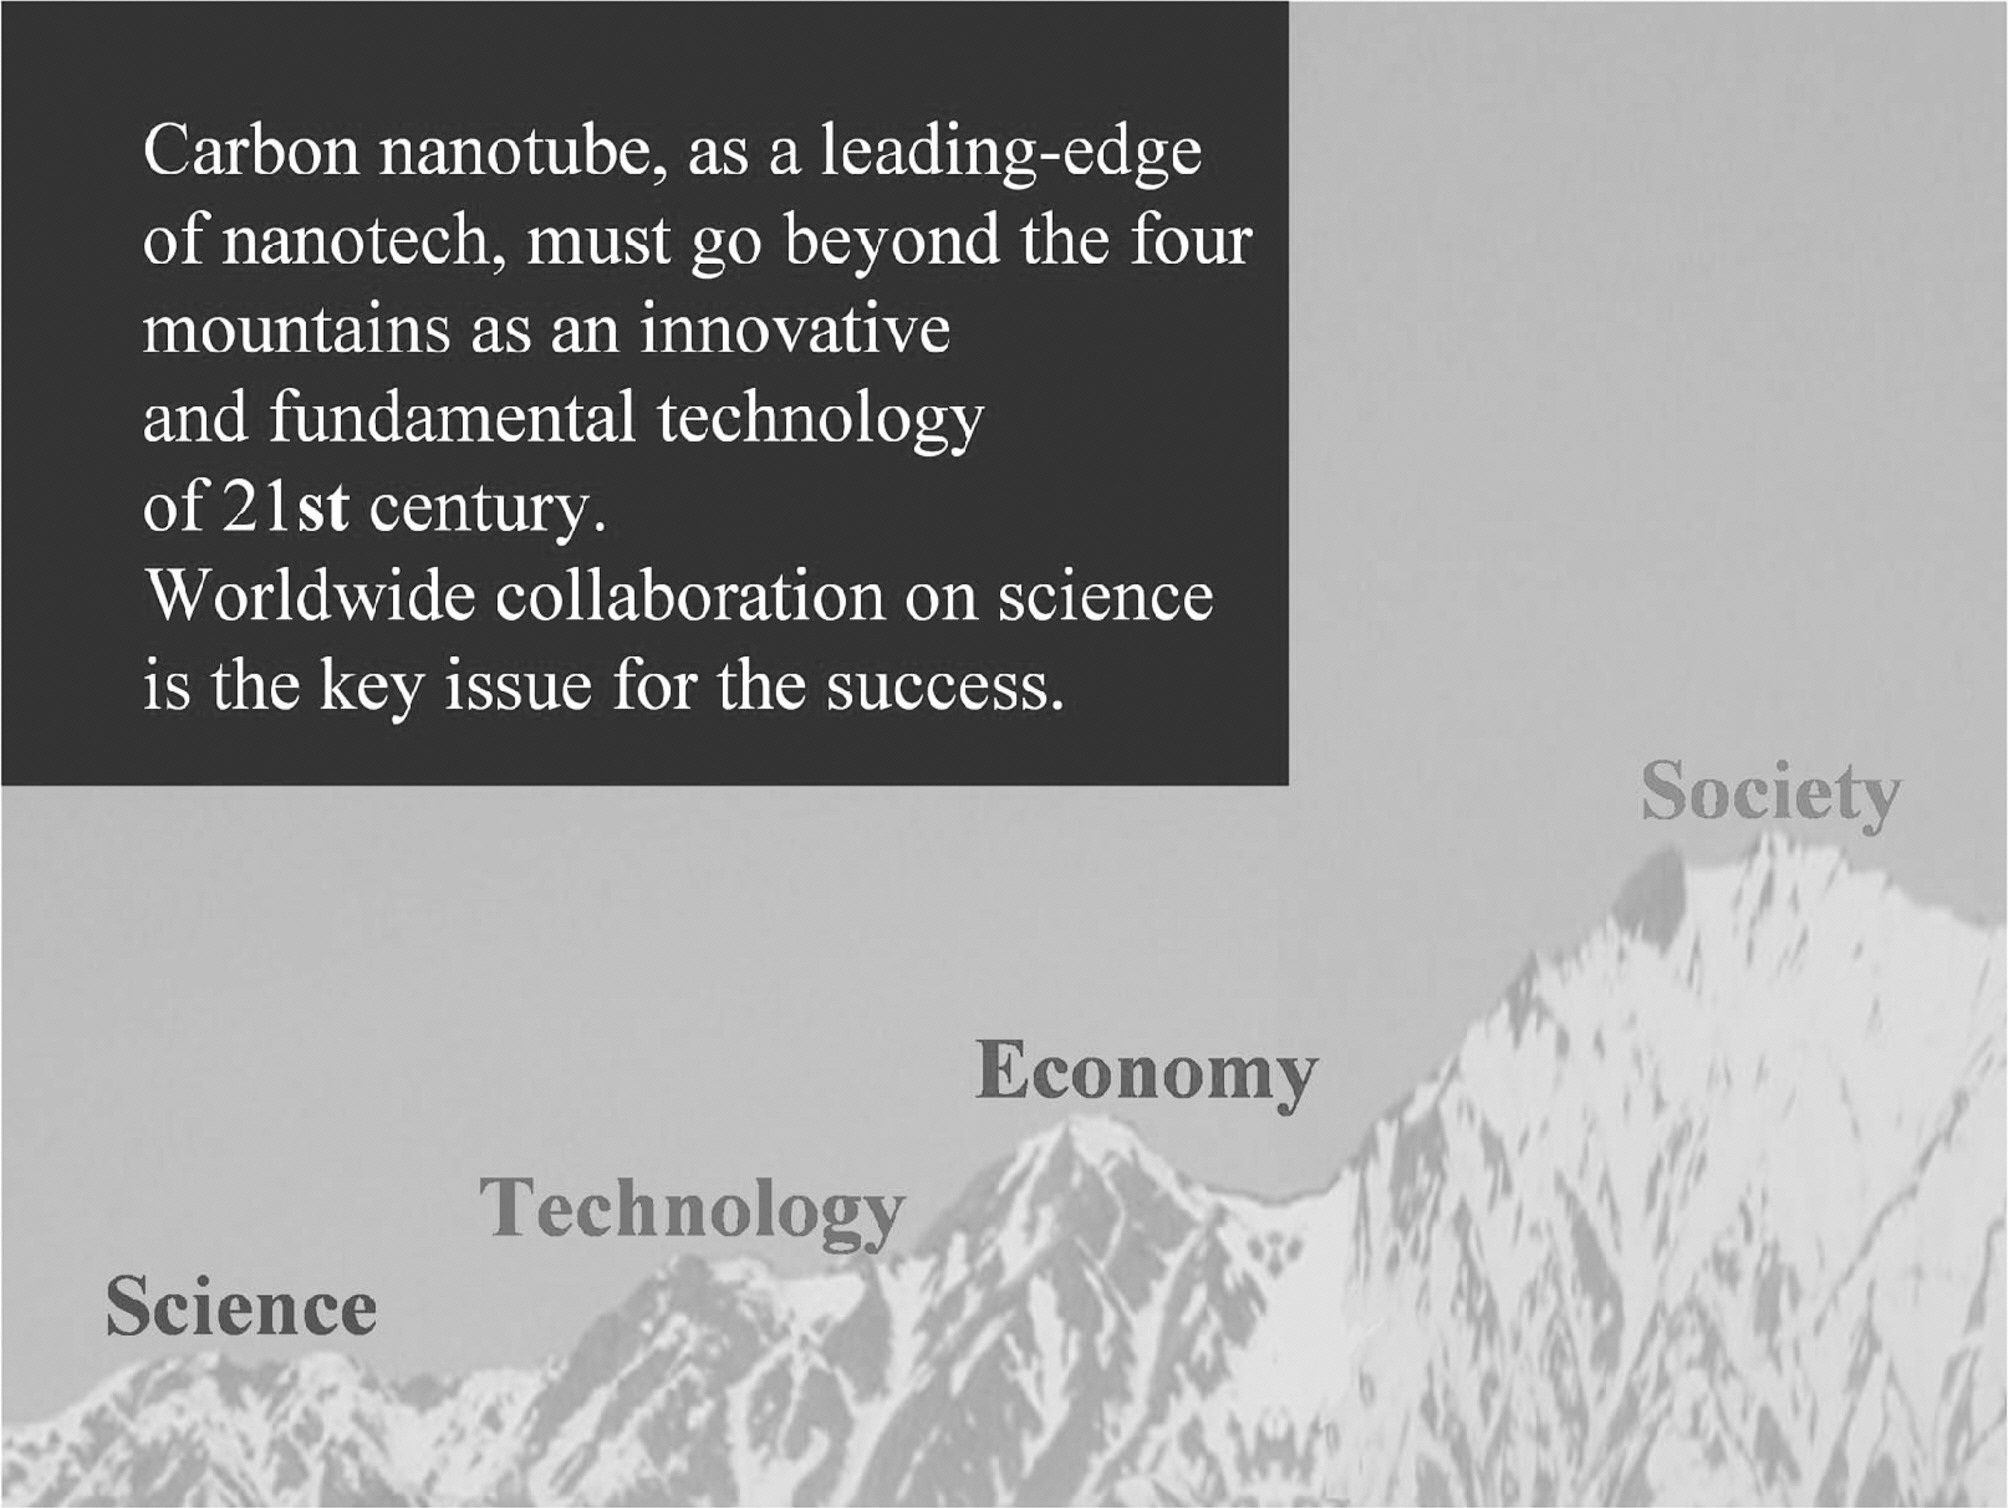 A schematic image describing four mountains to be solved for successful nanotube business.